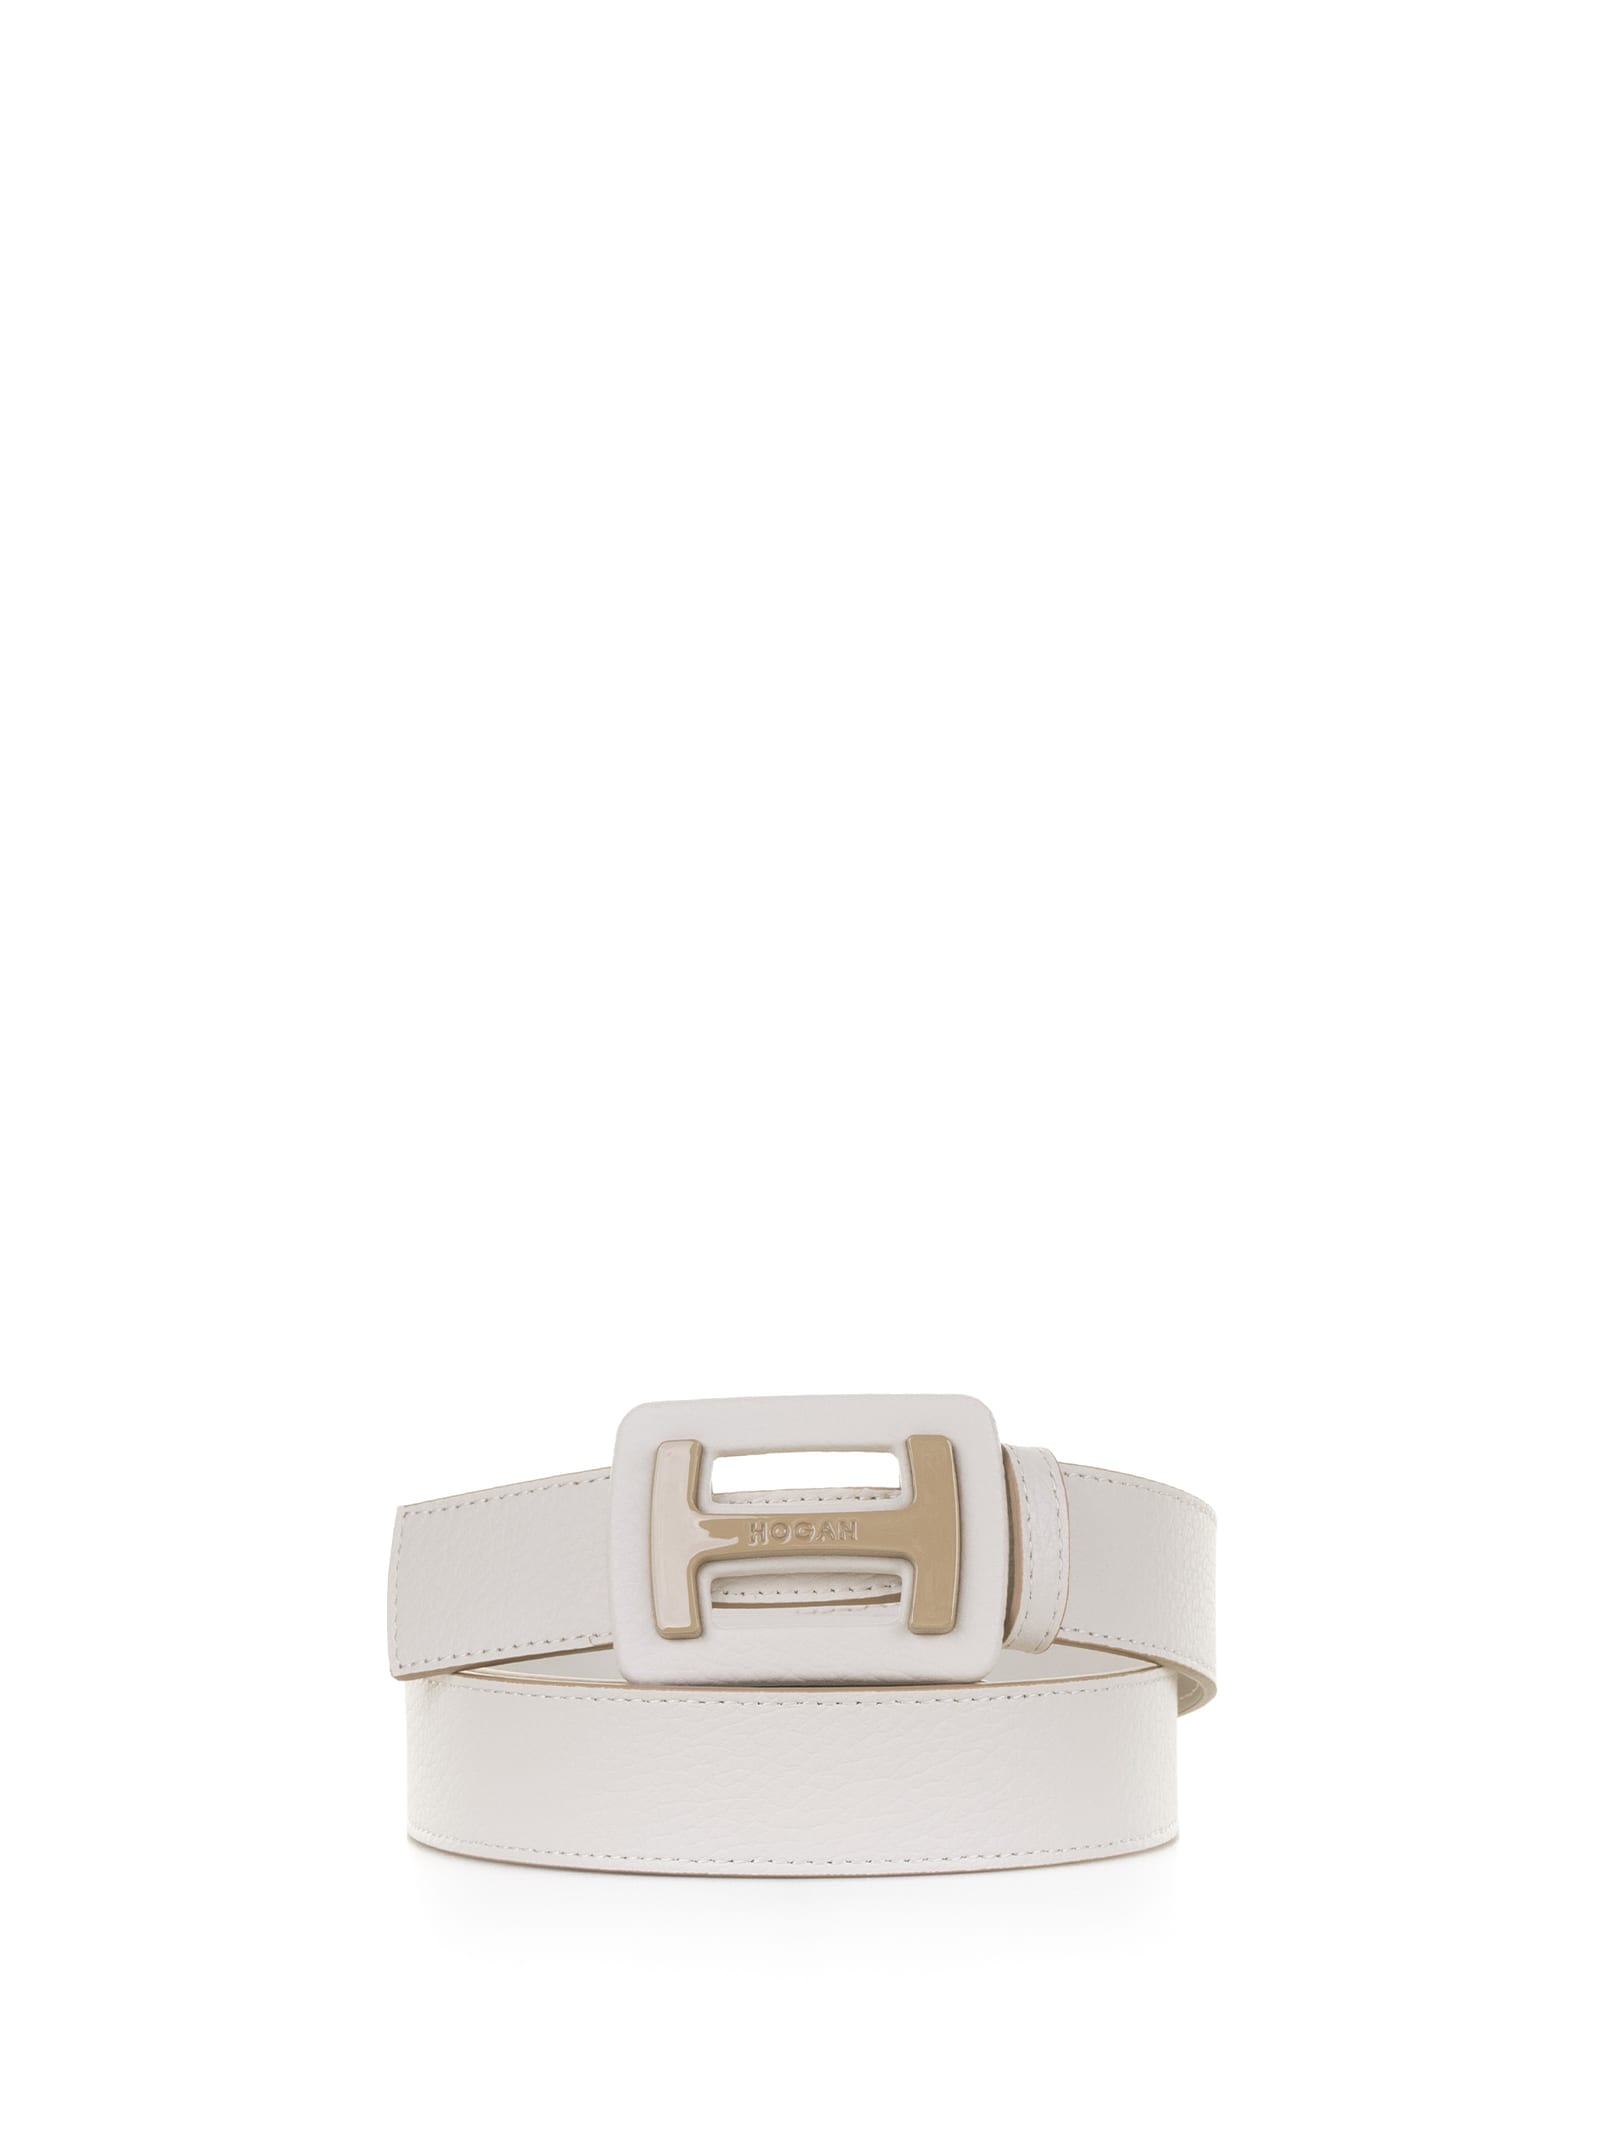 Hogan White Leather Belt With Logo In Bianco Marmo